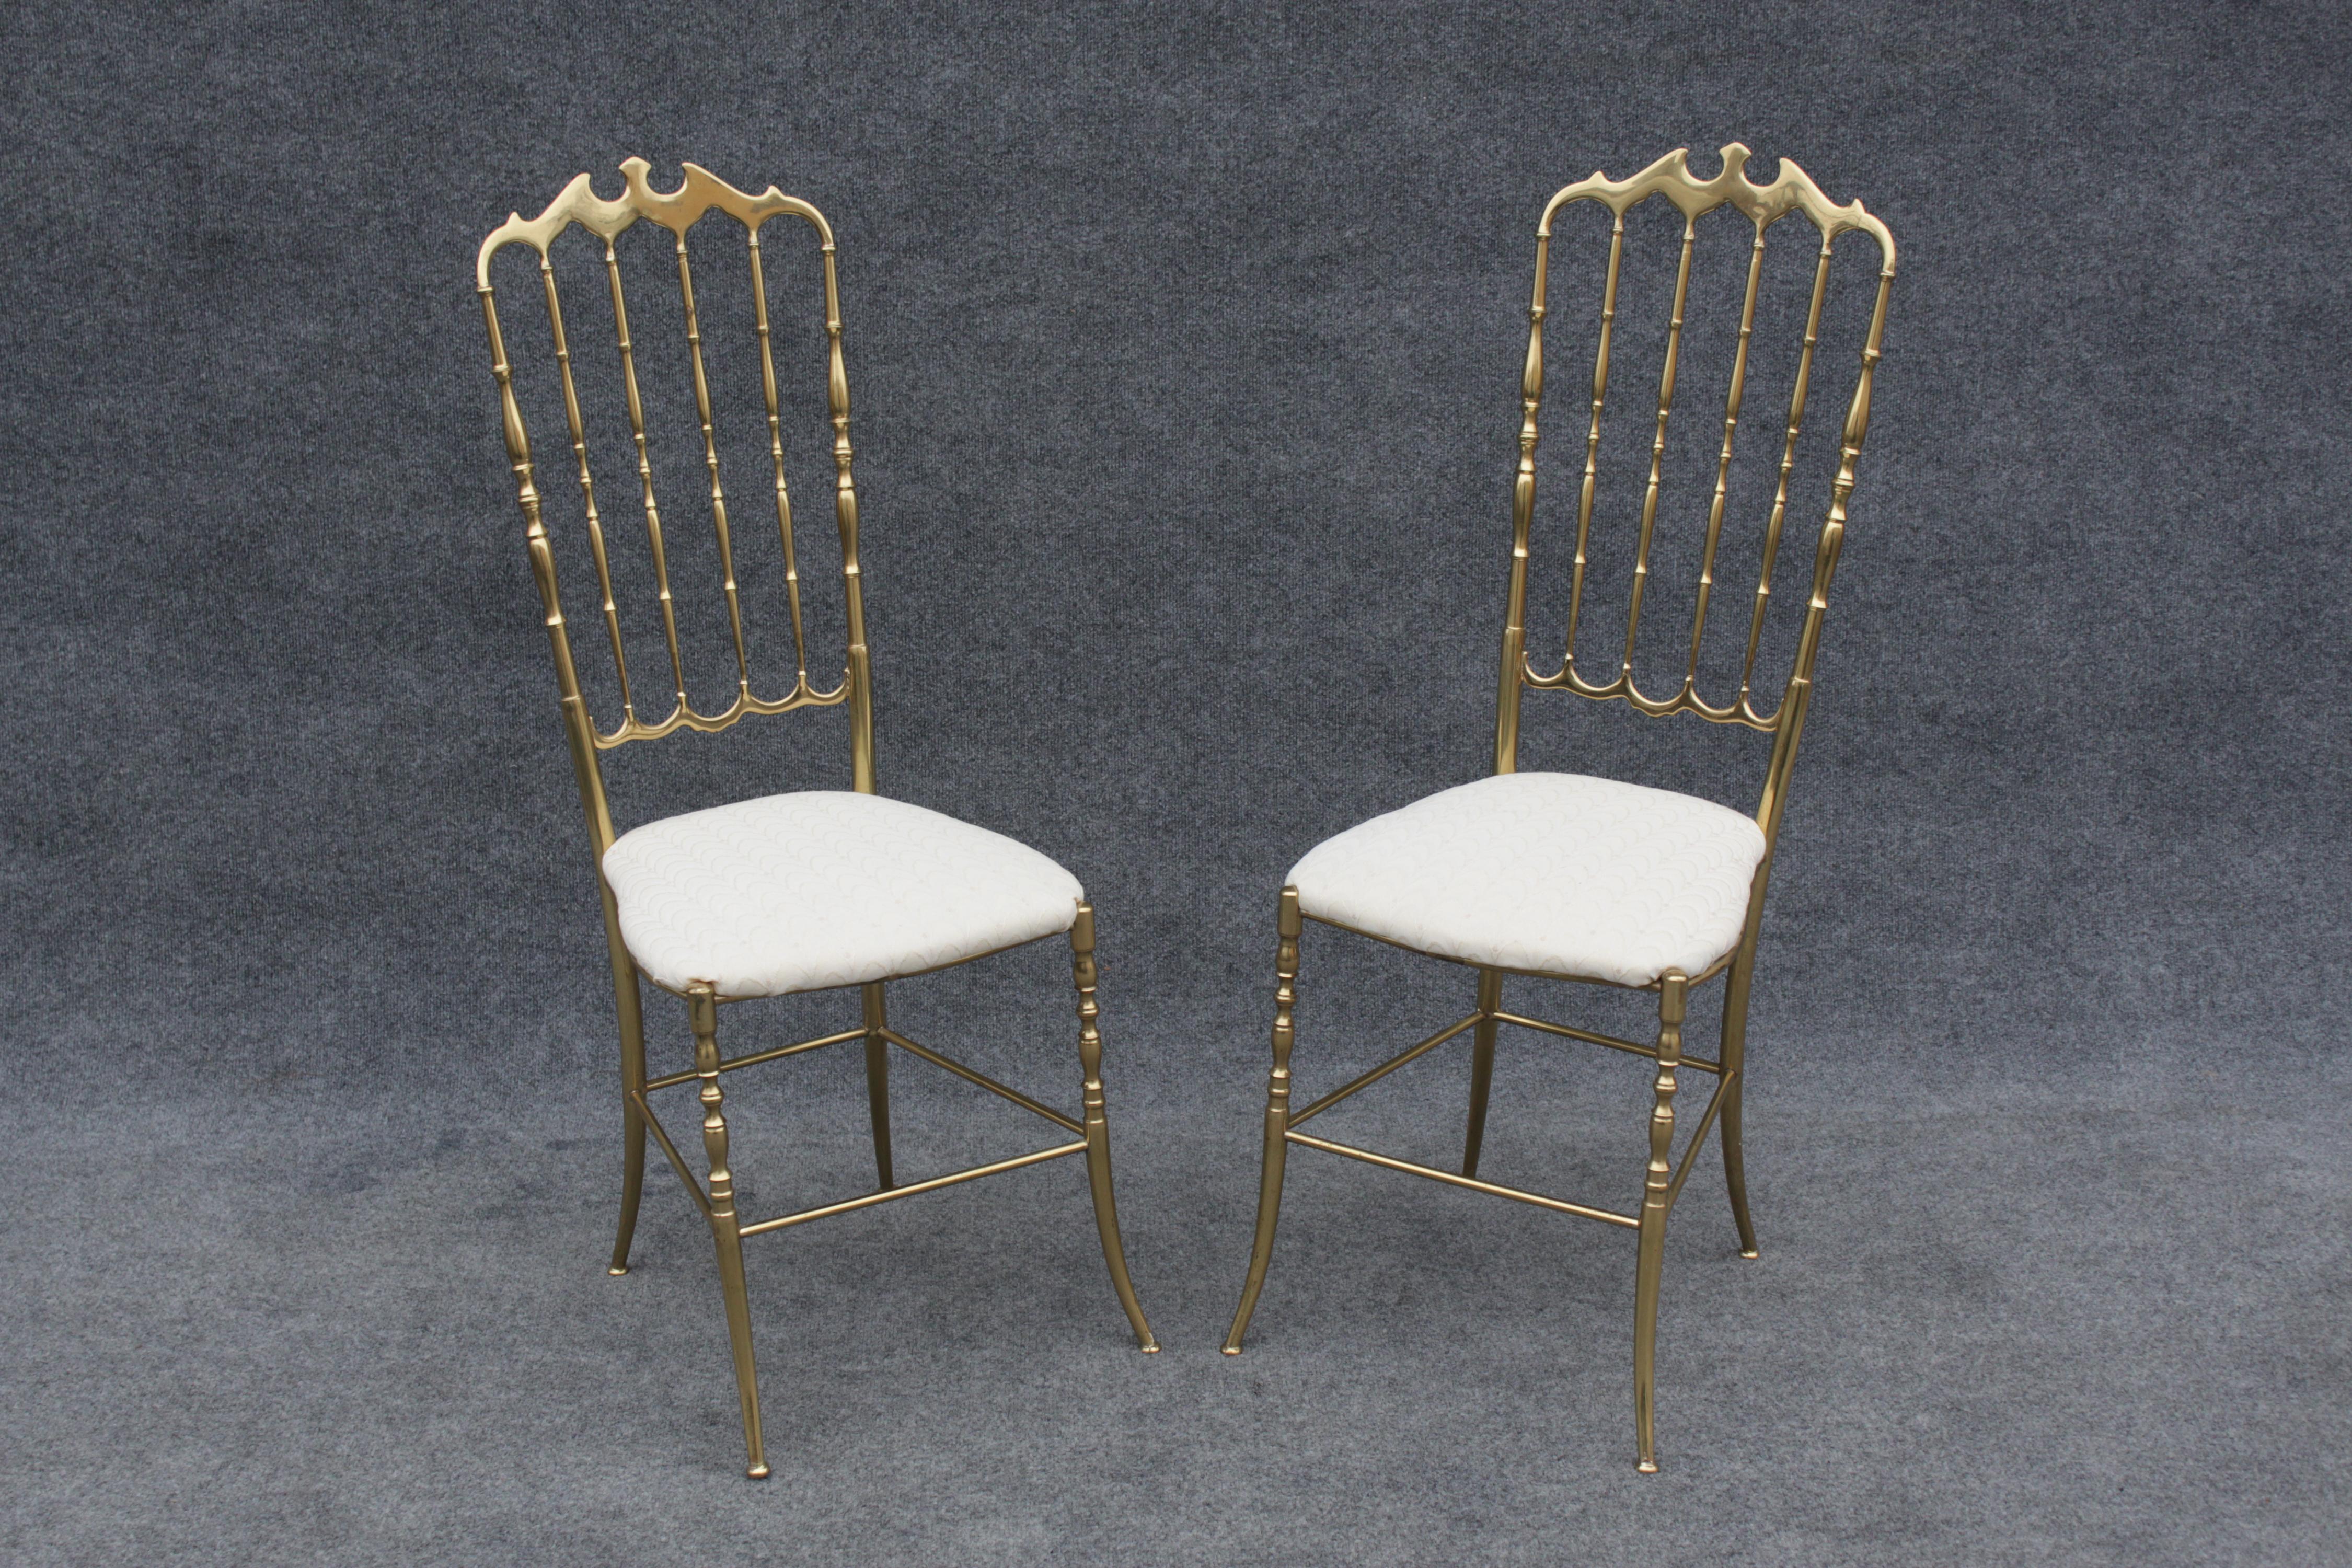 Pair of Solid Brass & White Upholstered Dining or Side Chairs by Chiavari Italy For Sale 2